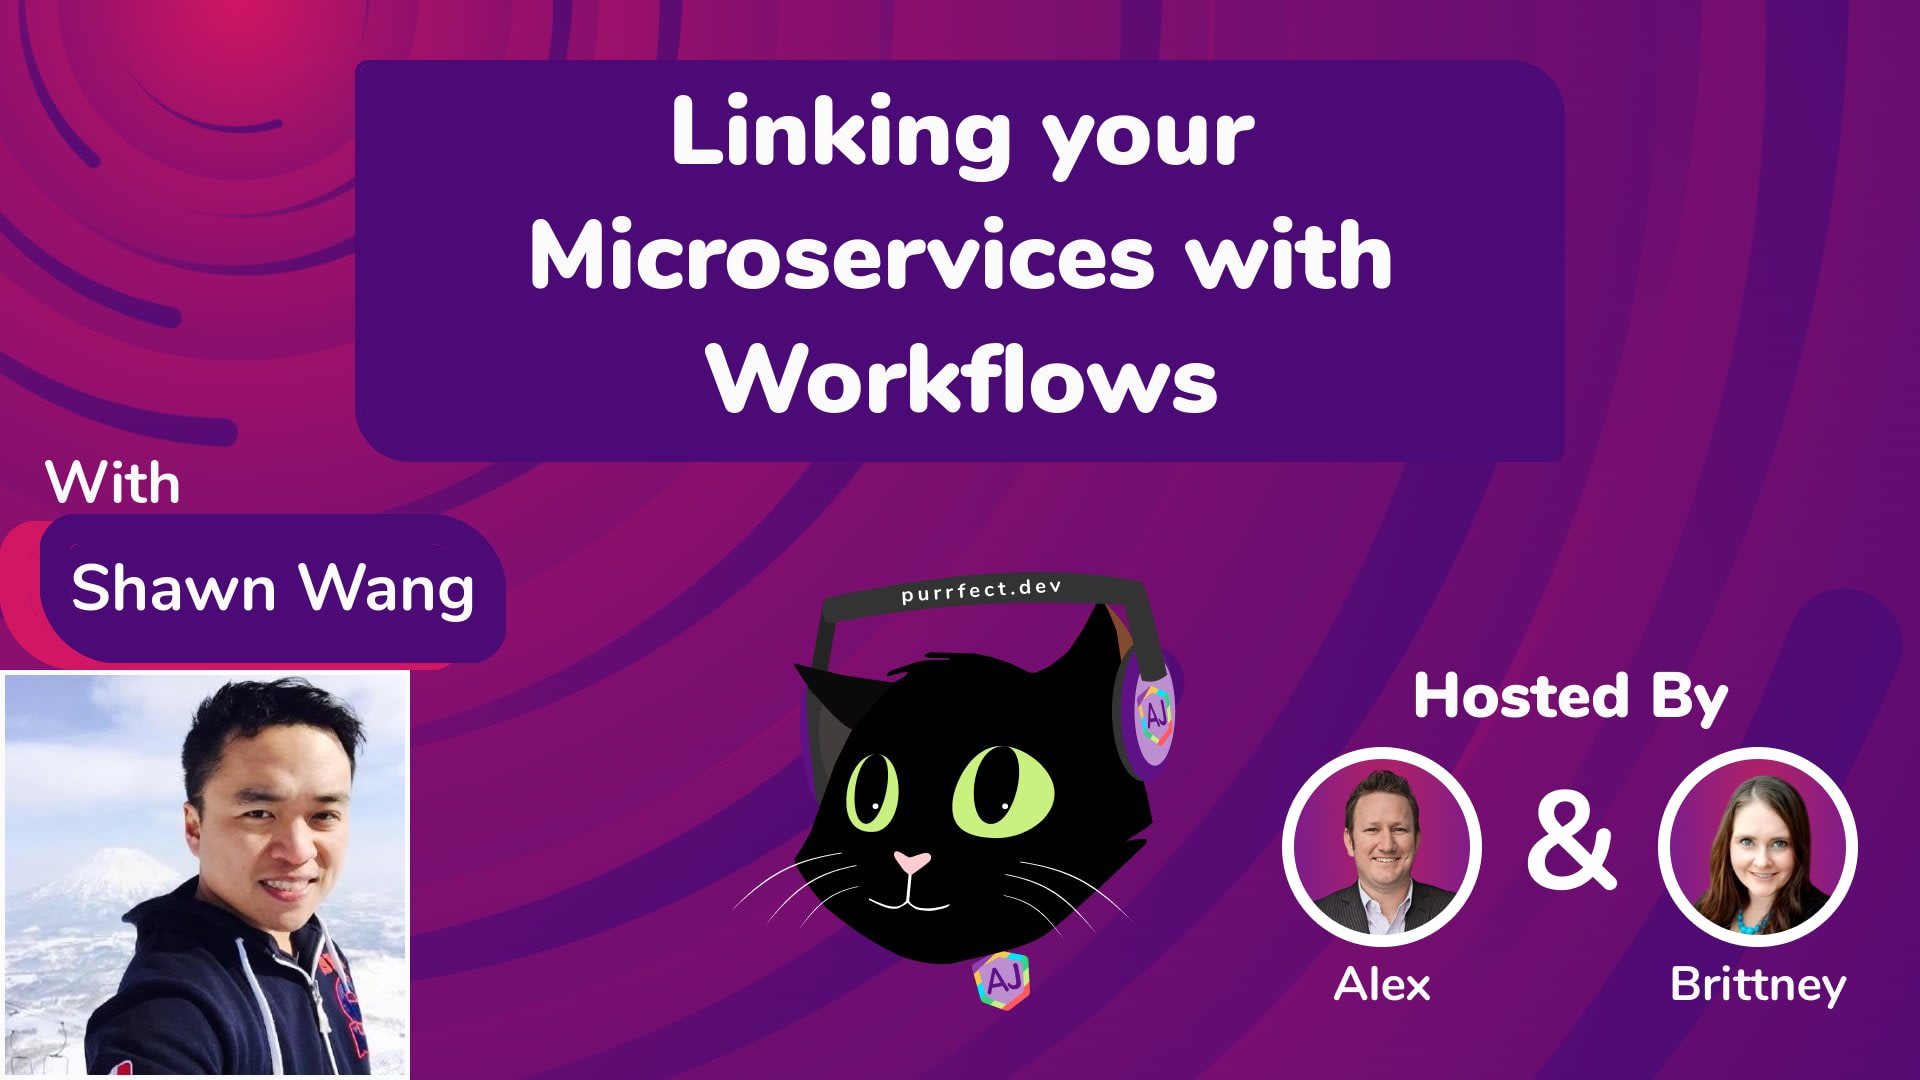 2.21 - Linking your Microservices with Workflows